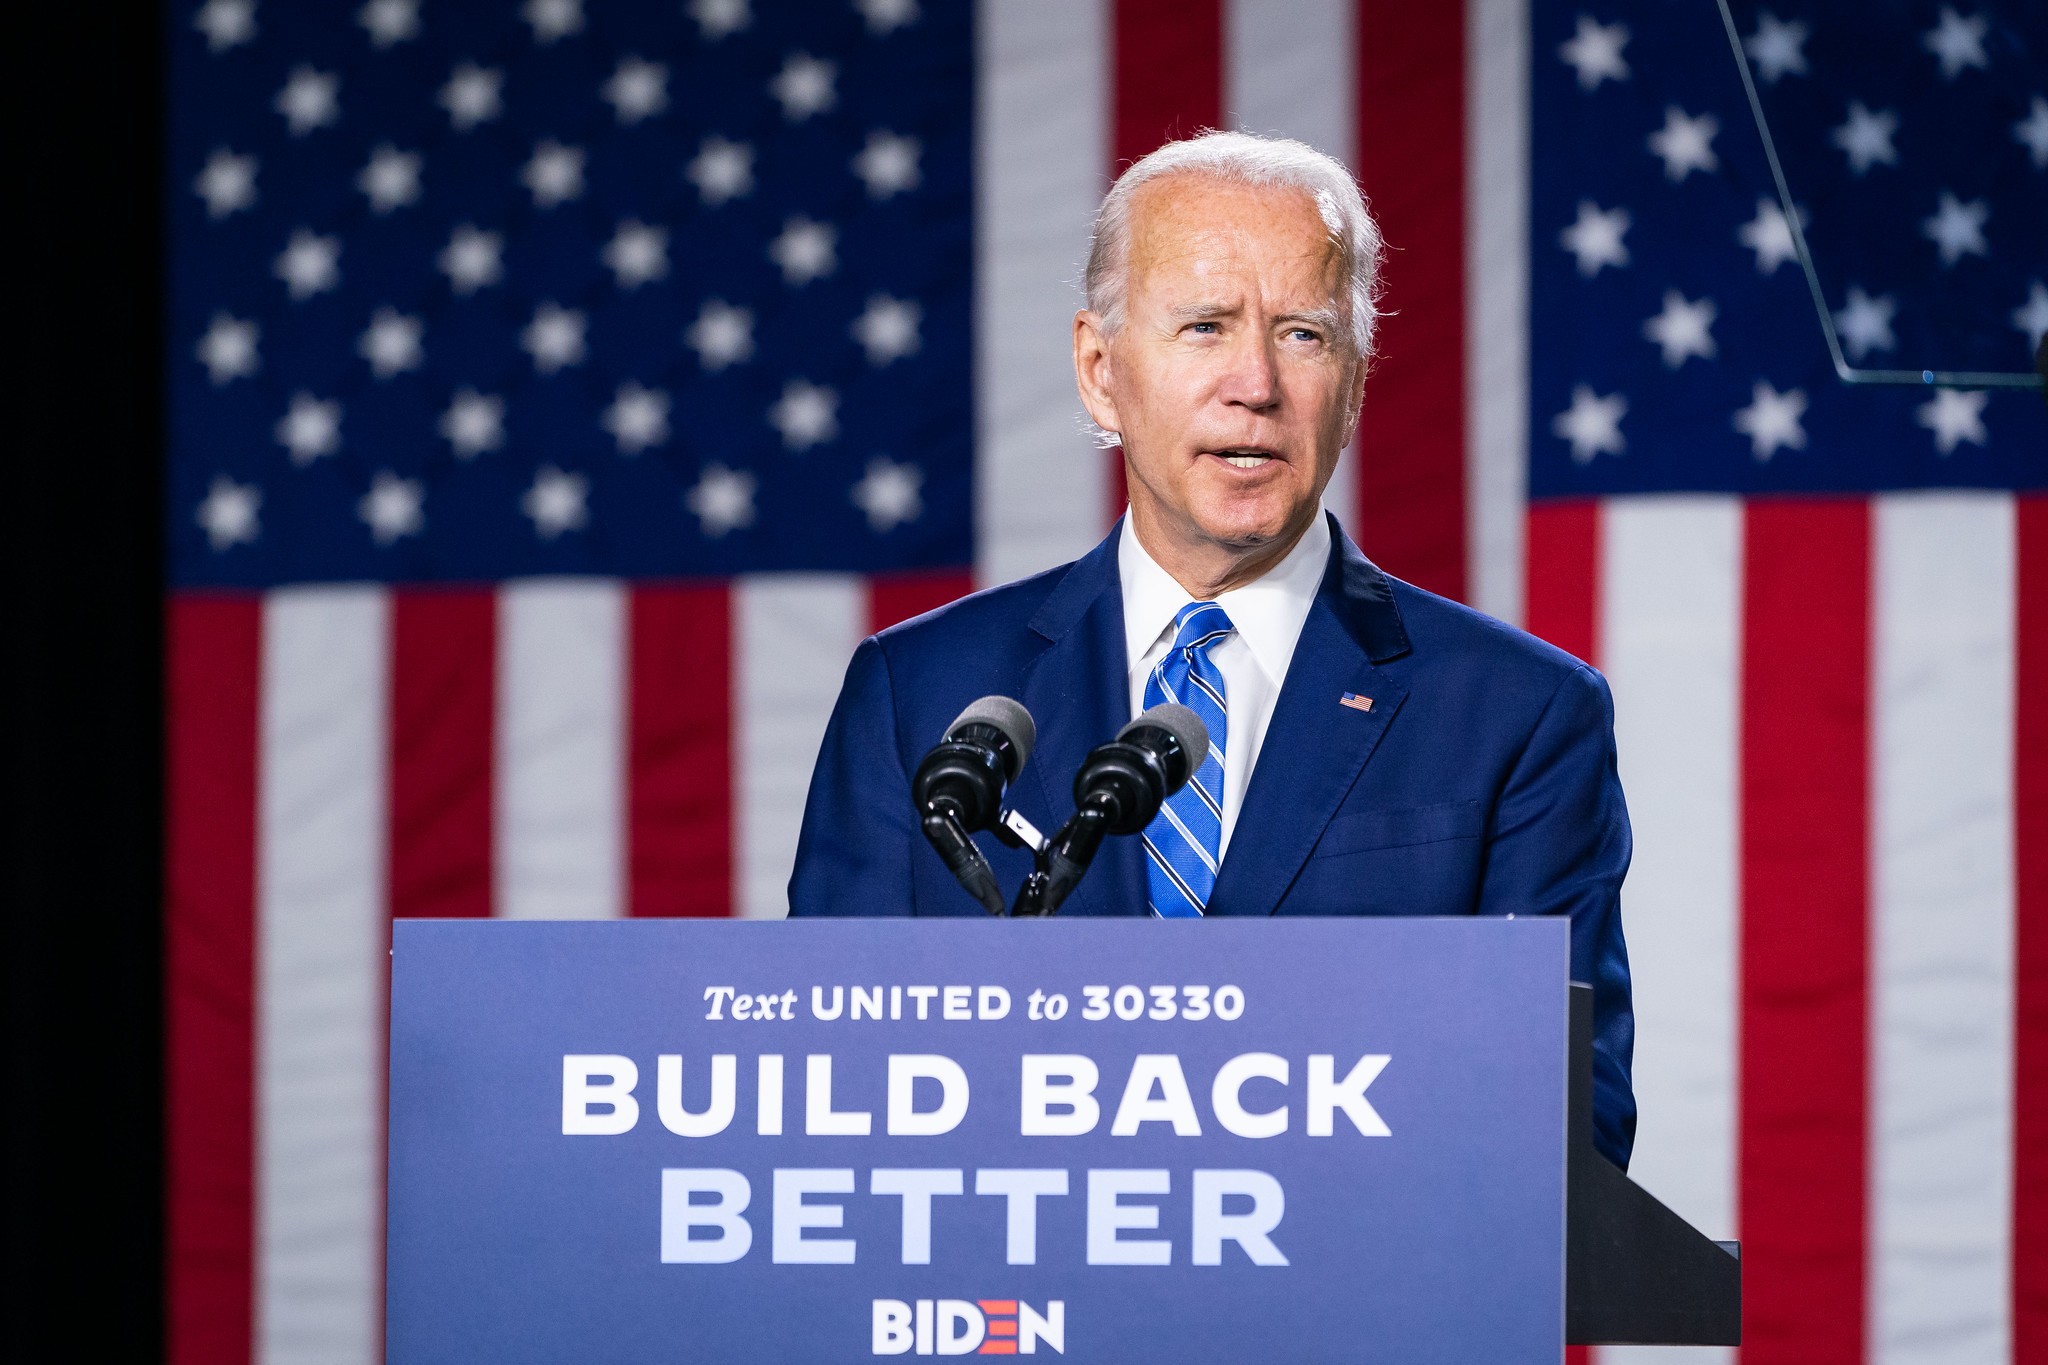 Biden Time Until January: Assessing Key Nuclear Policies of a Biden Presidency